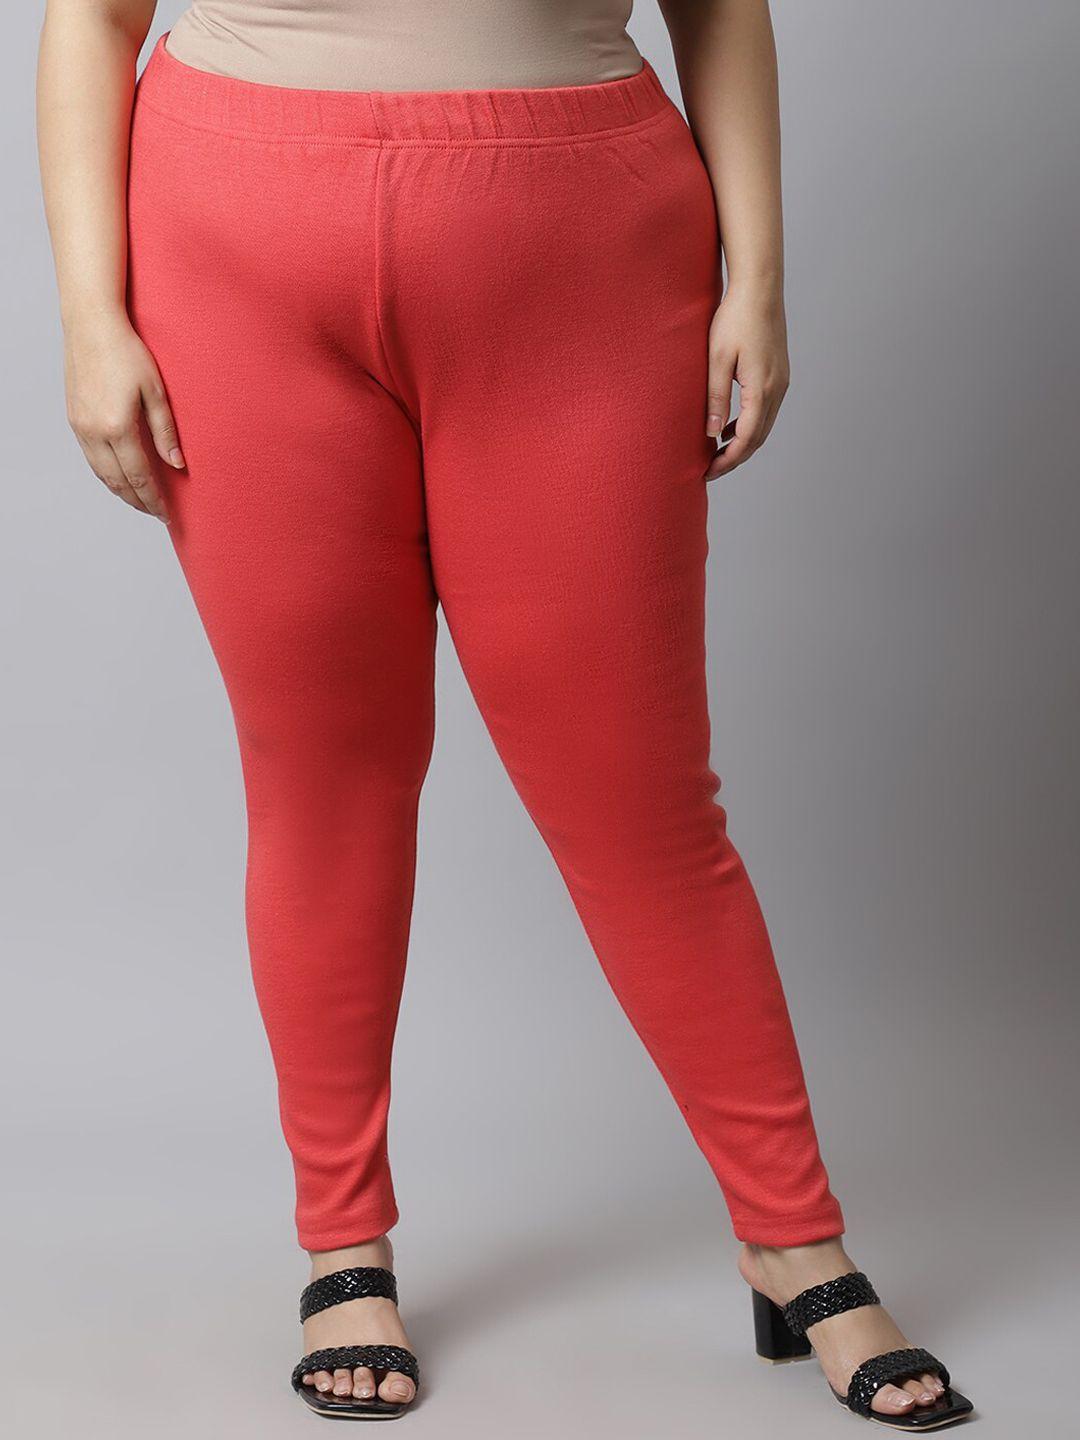 tag-7-women-plus-size-peach-coloured-solid-ankle-length--leggings